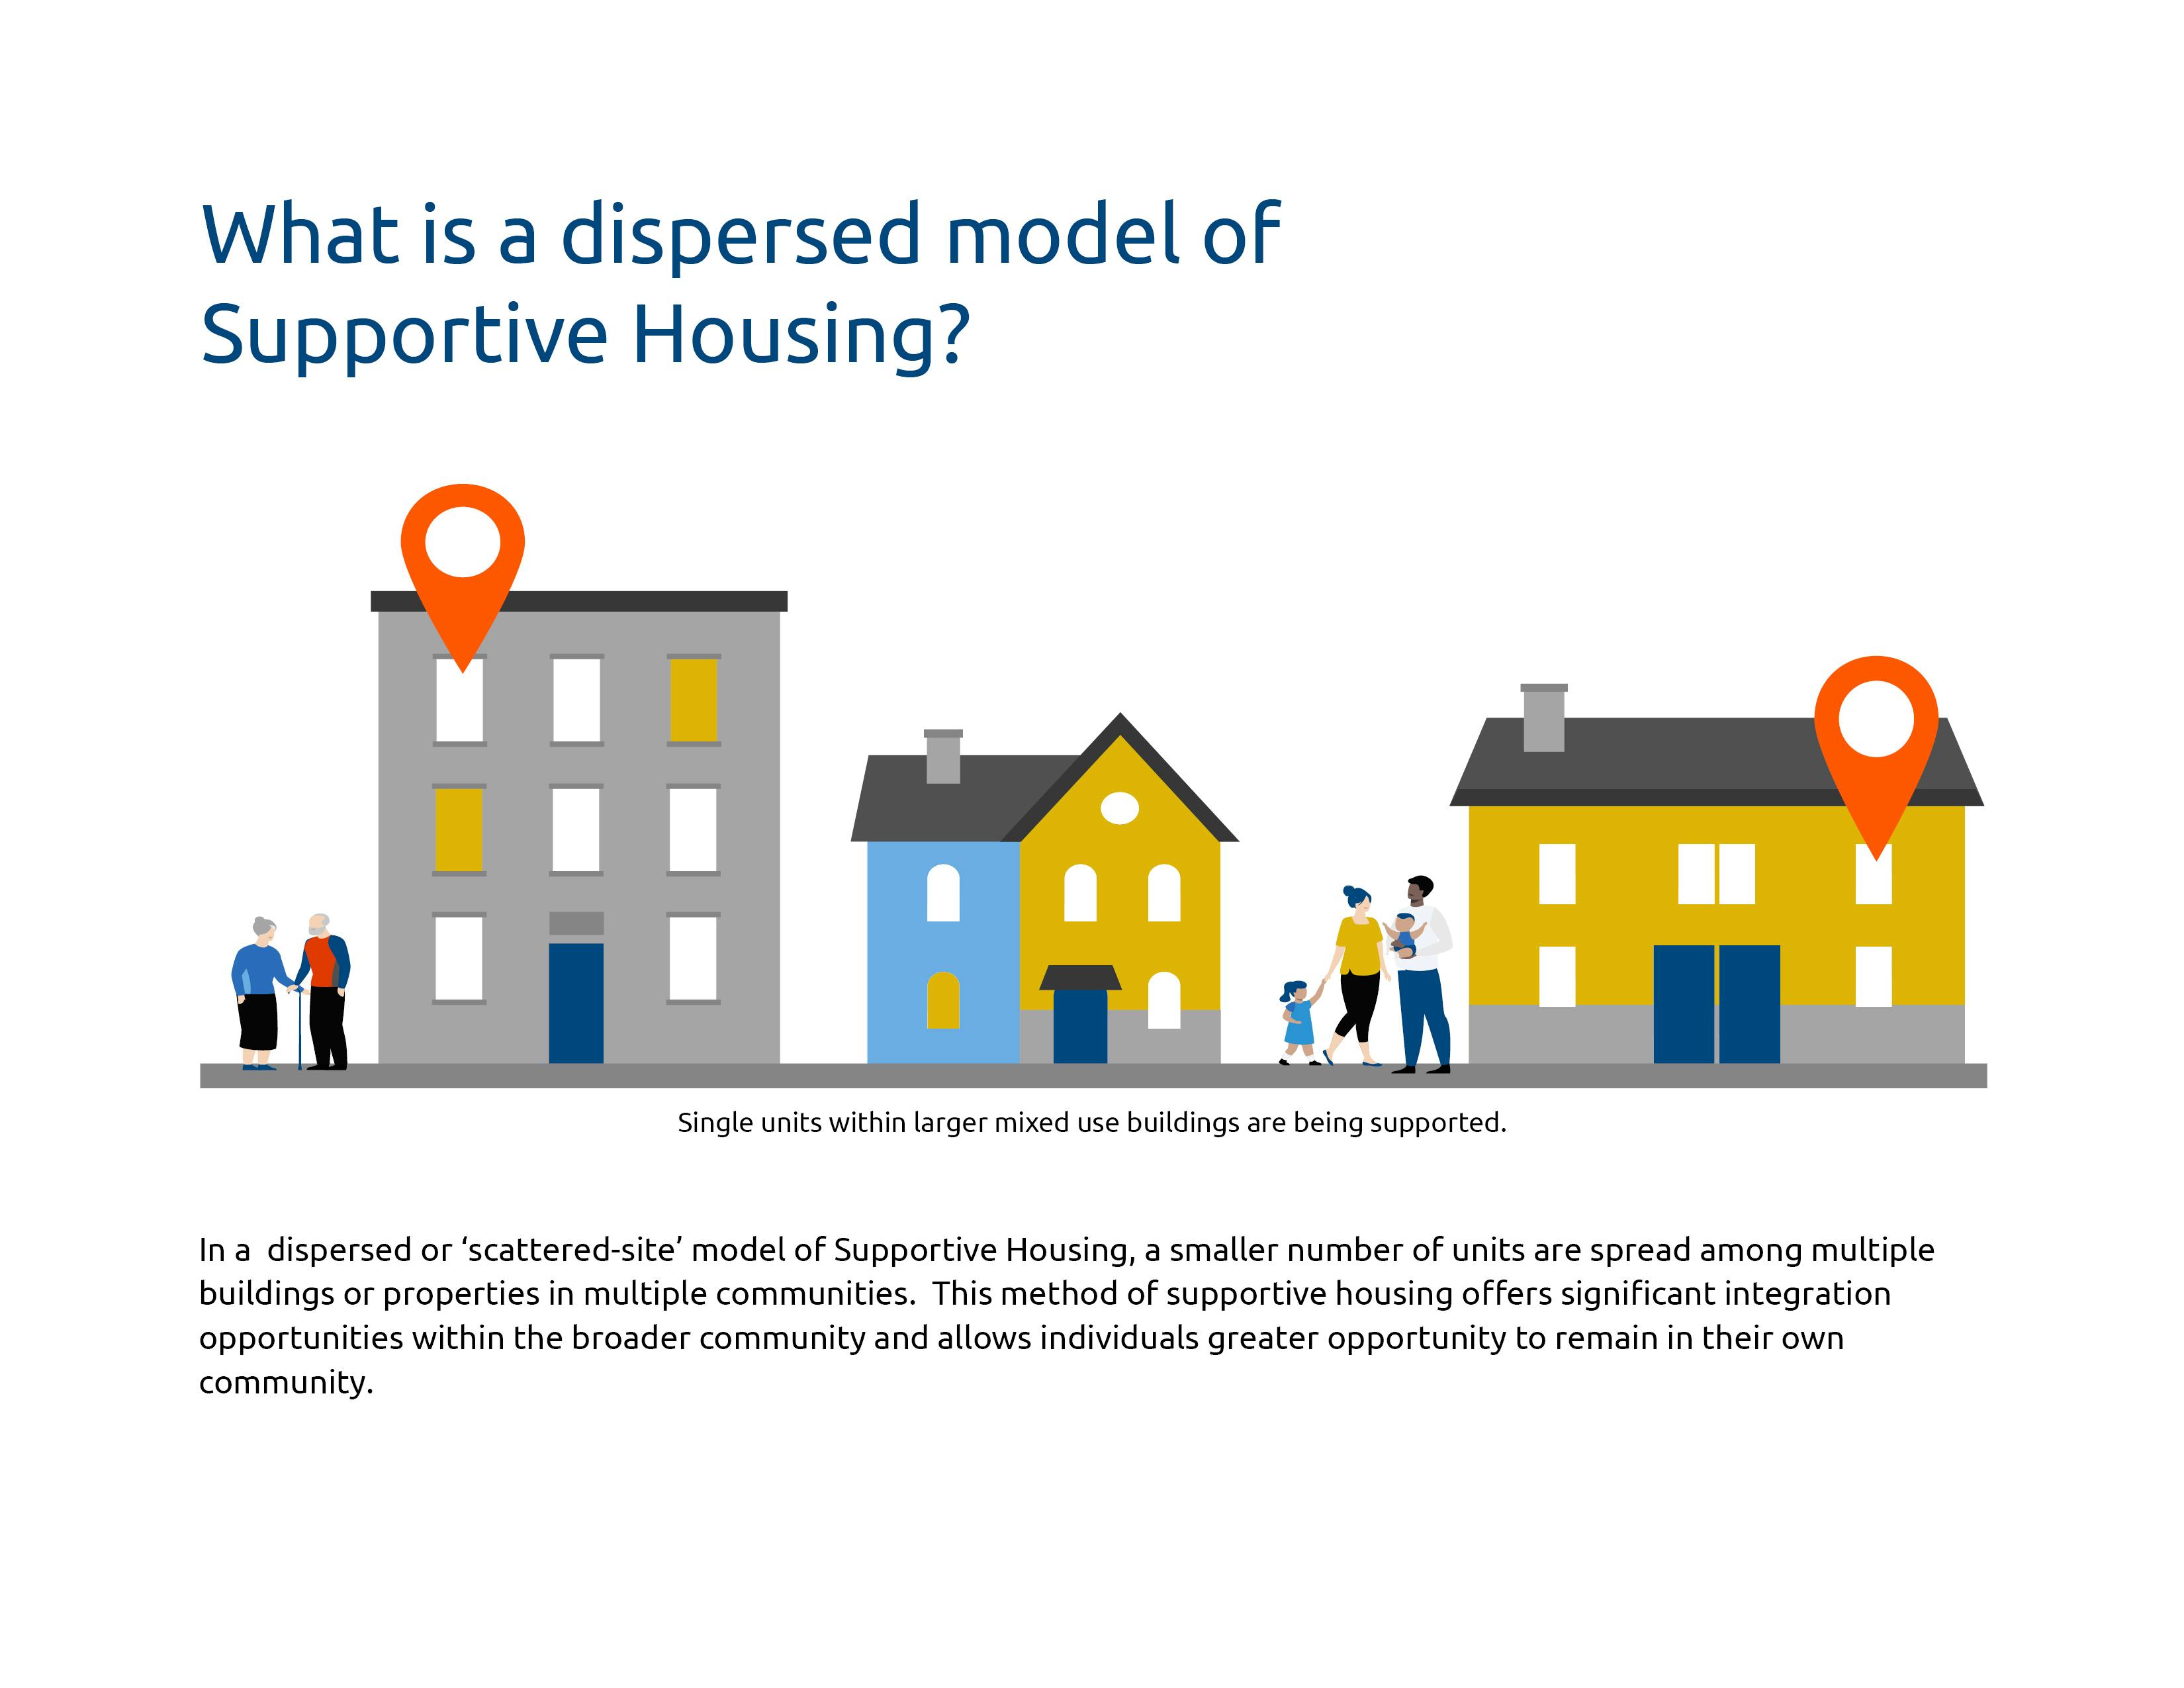 Dispersed Supportive Housing